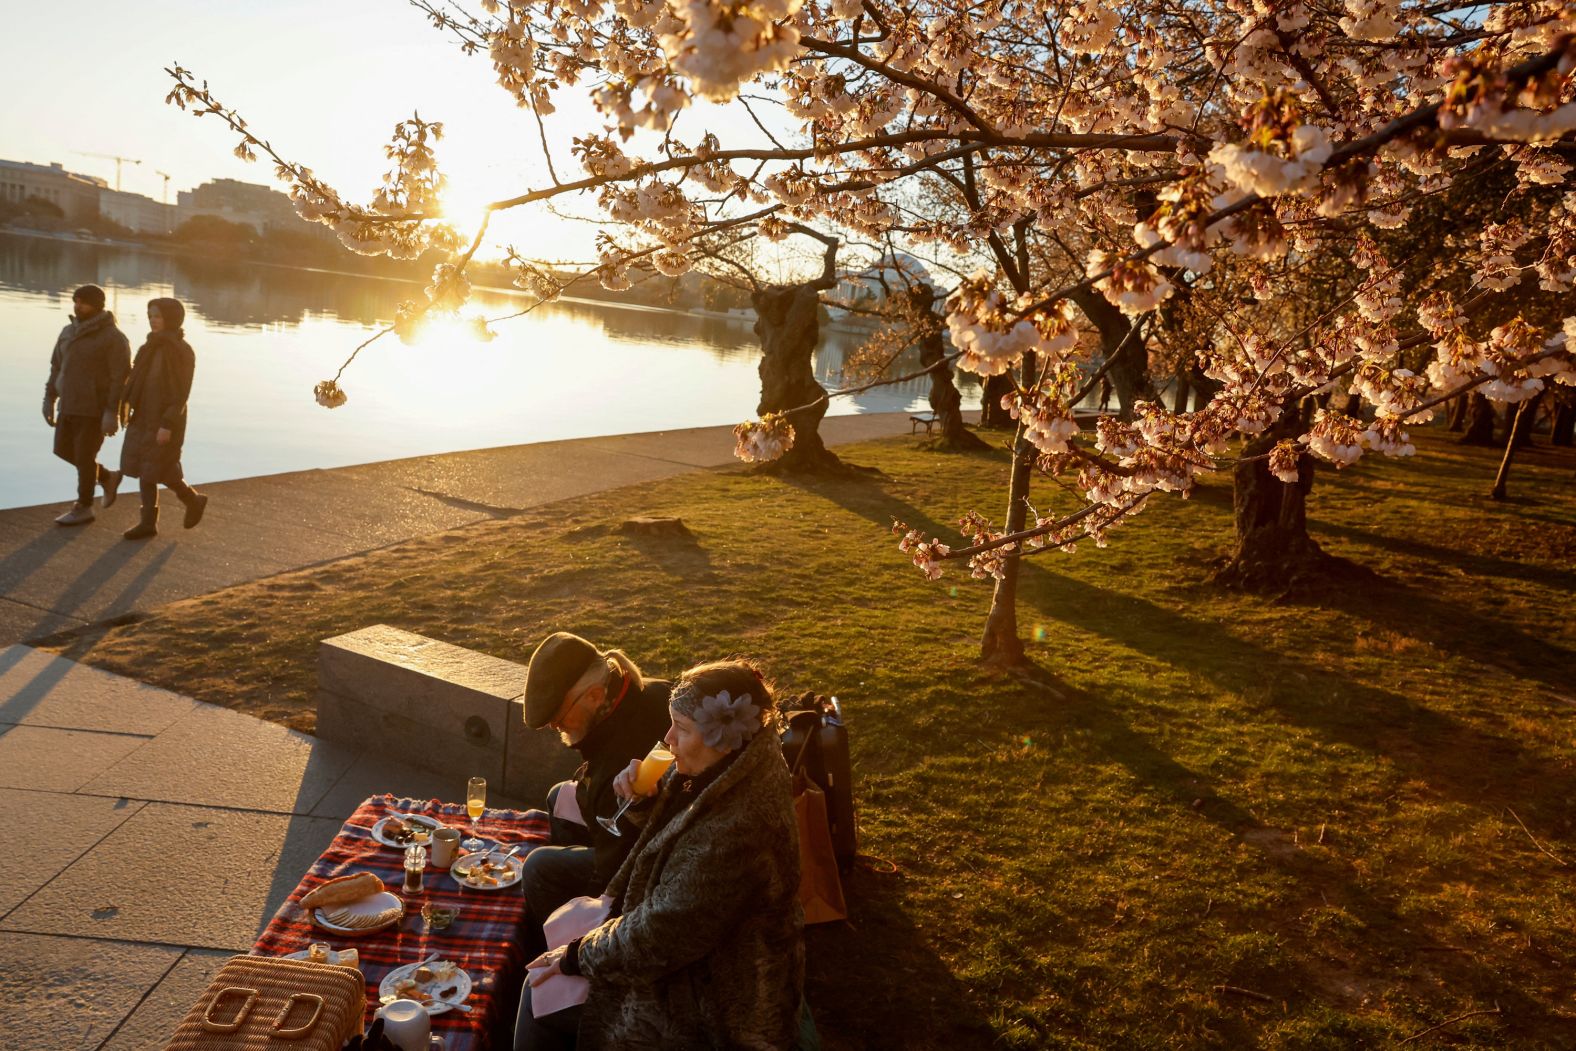 Elizabeth Willson and Garland Phillips have a picnic breakfast amongst the blooming cherry blossoms in Washington, DC, on Monday, March 20. <a href="index.php?page=&url=http%3A%2F%2Fwww.cnn.com%2F2023%2F03%2F16%2Fworld%2Fgallery%2Fphotos-this-week-march-10-march-16-ctrp%2Findex.html" target="_blank">See last week in 36 photos</a>.